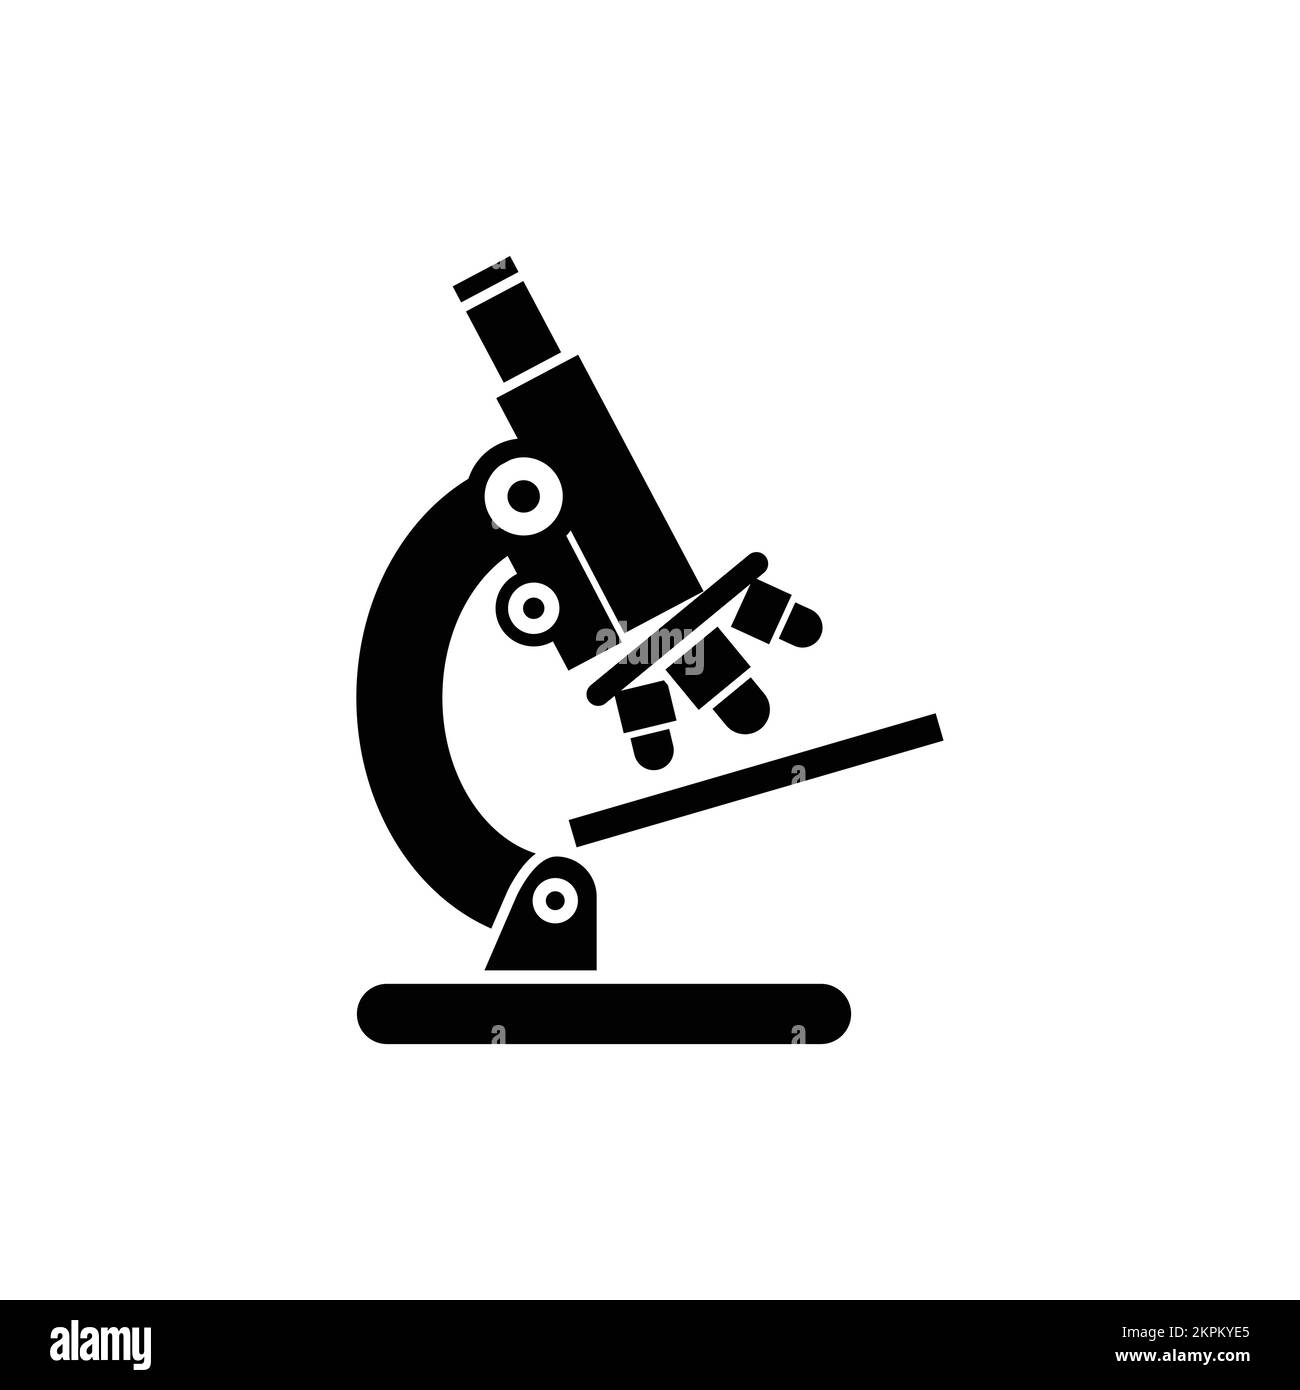 Detailed monocular microscope with three objectives icon vector. Analysis laboratory logo symbol. Stock Vector